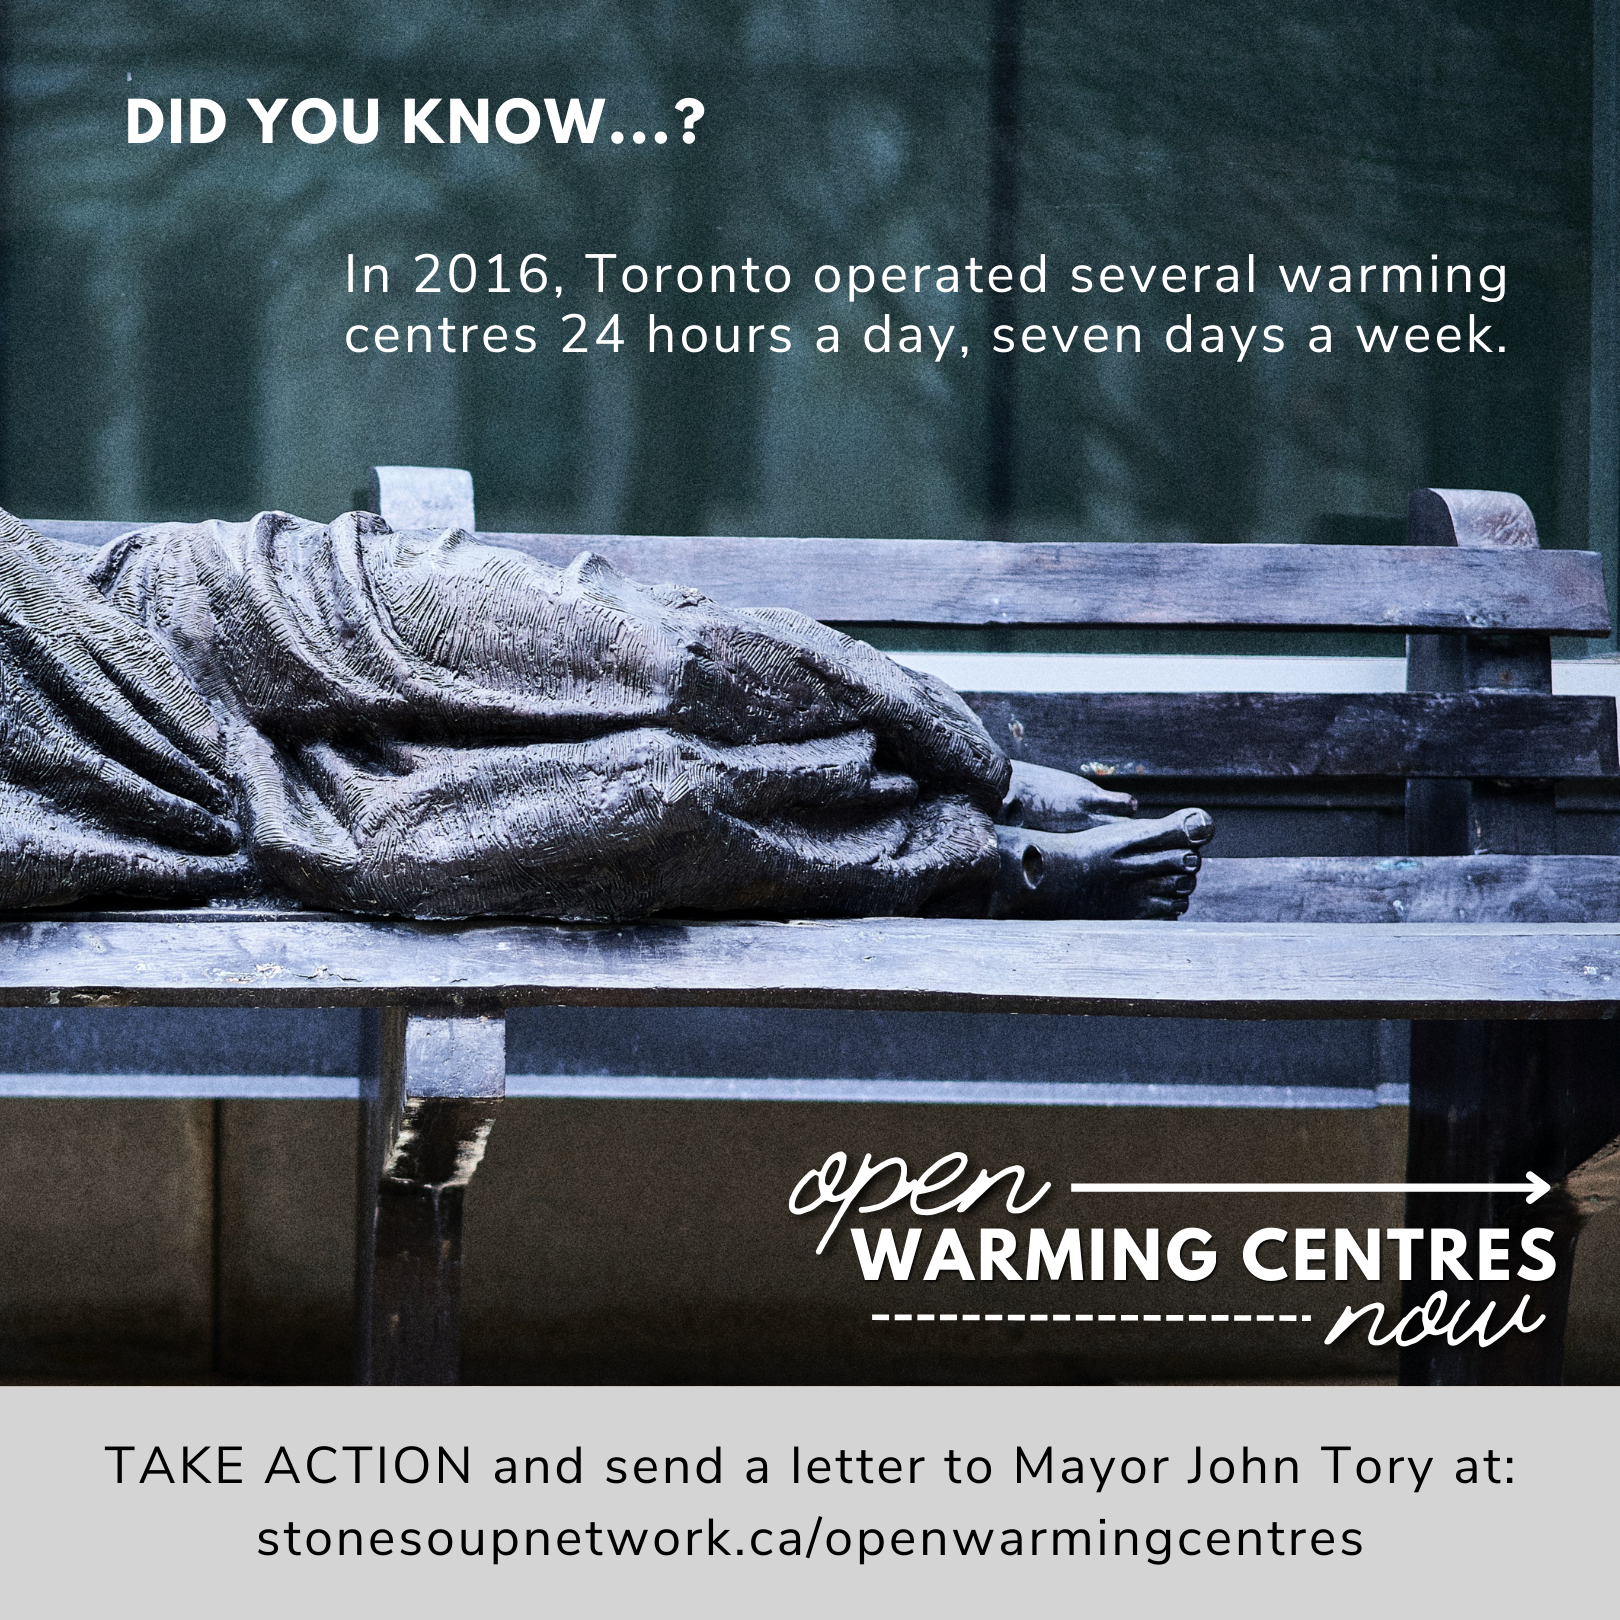 An illustration with people sitting in front of tents with text that reads, "Open Warming Centres Now" and "Tonight 168 people will be turned aay from the Toronto shelter system because there is no space."